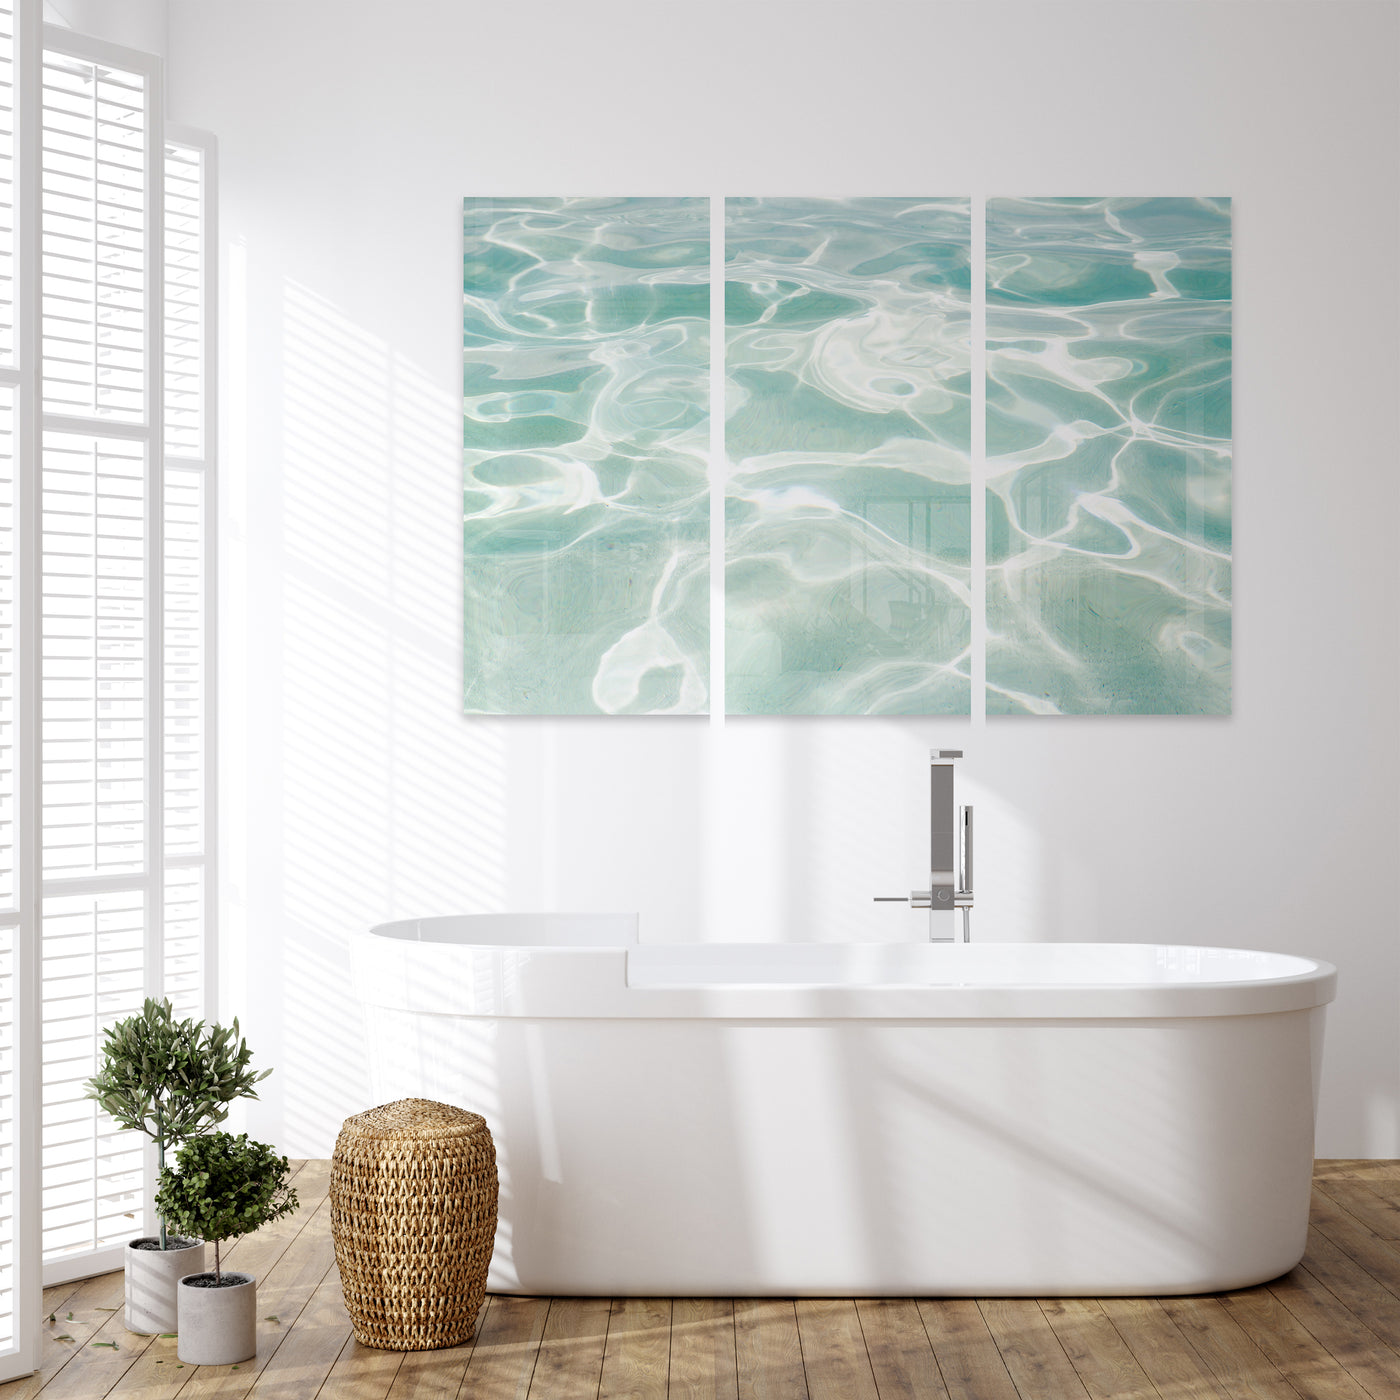 Caribbean Sea No 2 - Acrylic glass 3 Piece Large Wall Art by Cattie Coyle Photography in bathroom